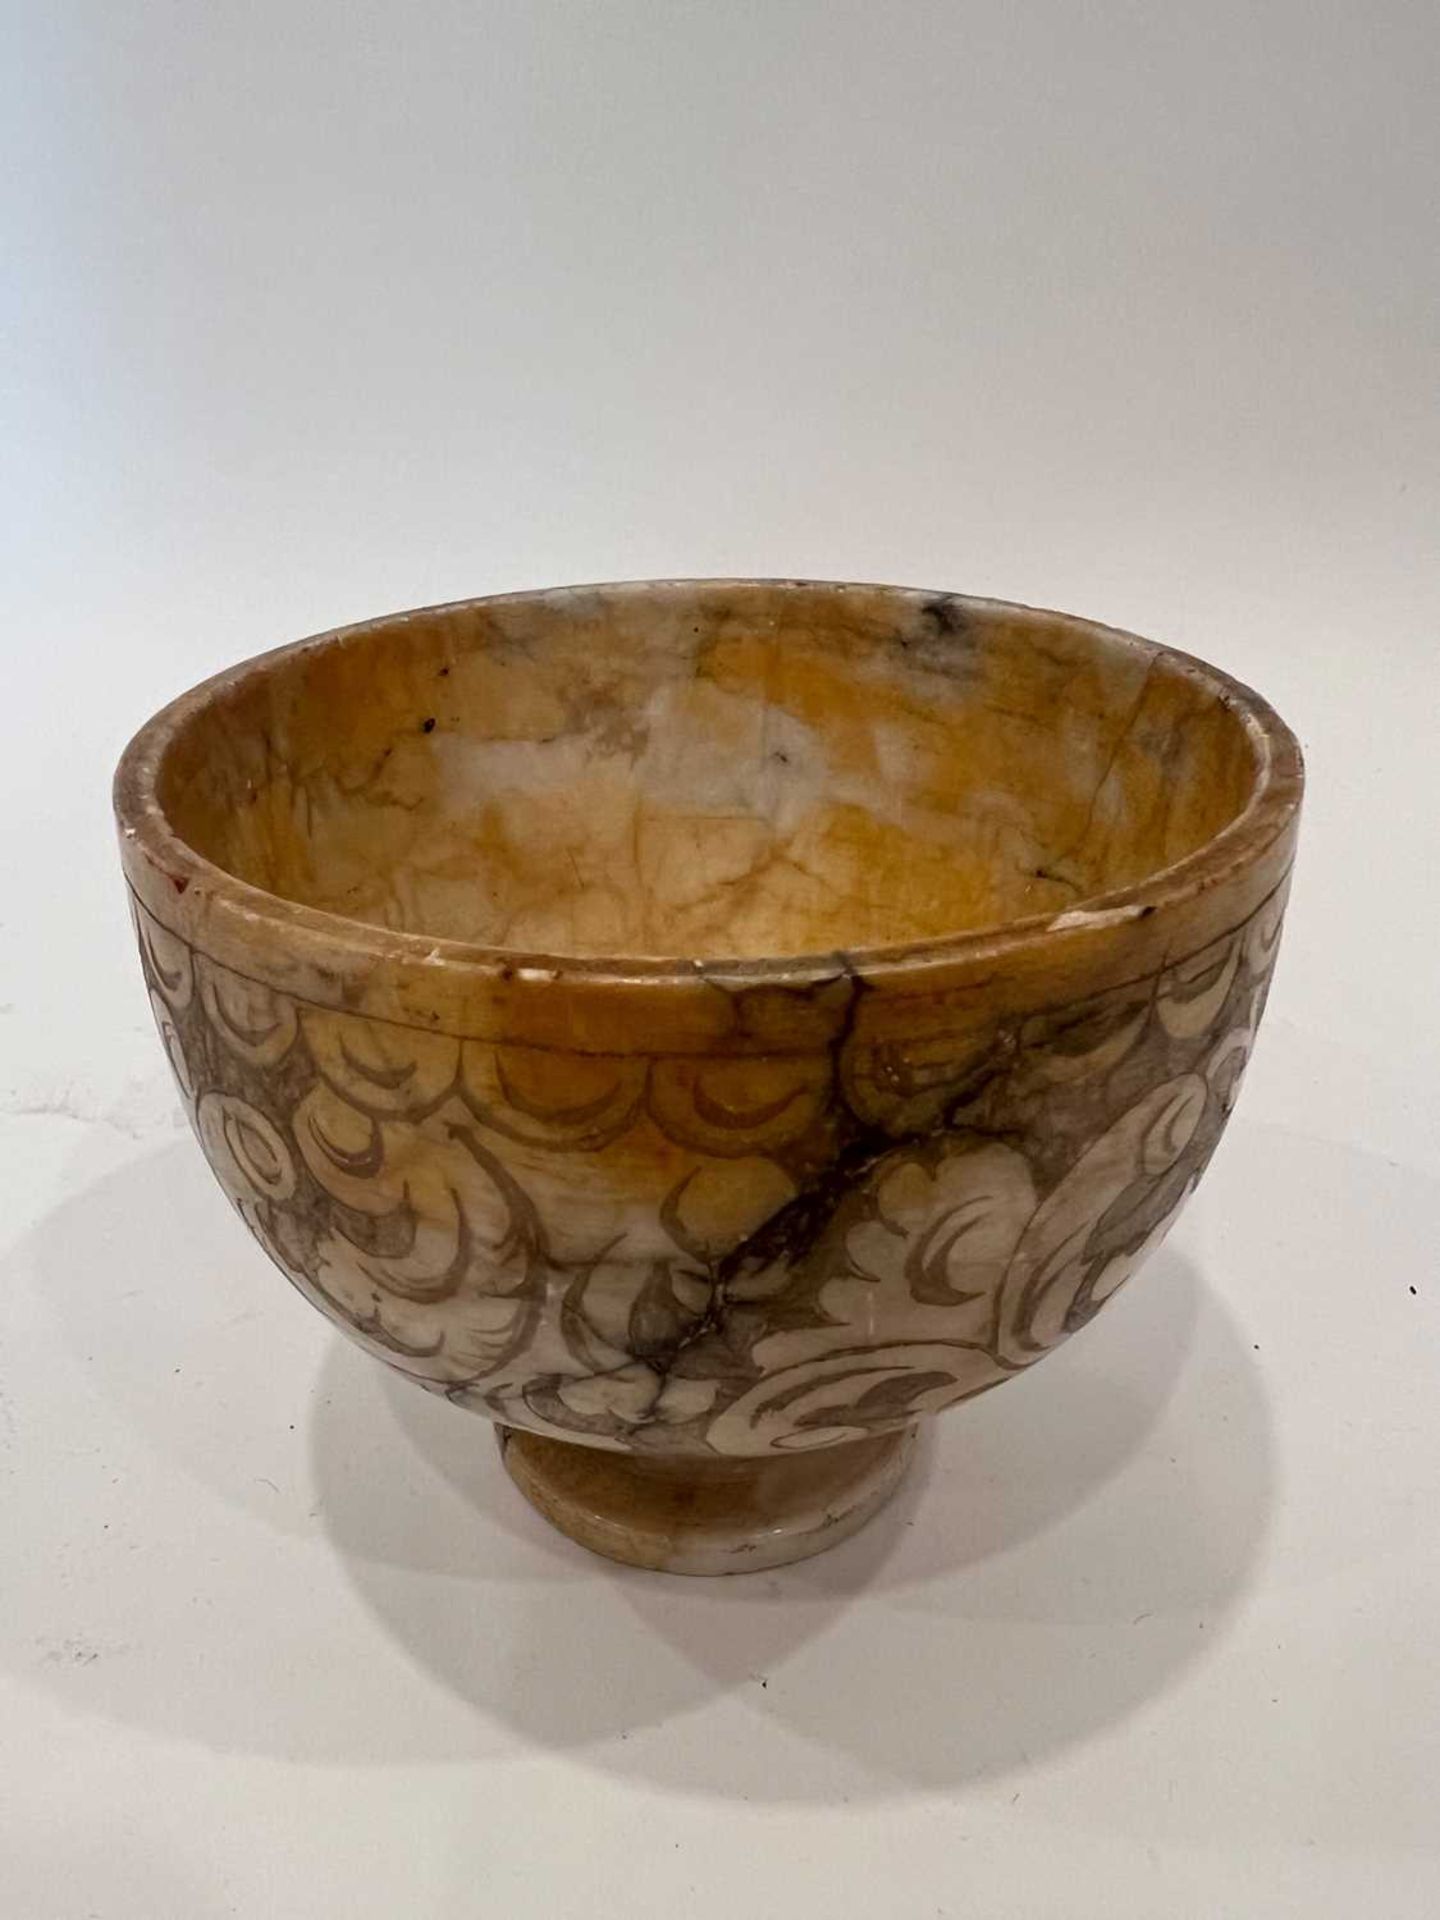 AN 18TH / 19TH CENTURY ITALIAN CARVED ALABASTER BOWL - Image 6 of 6